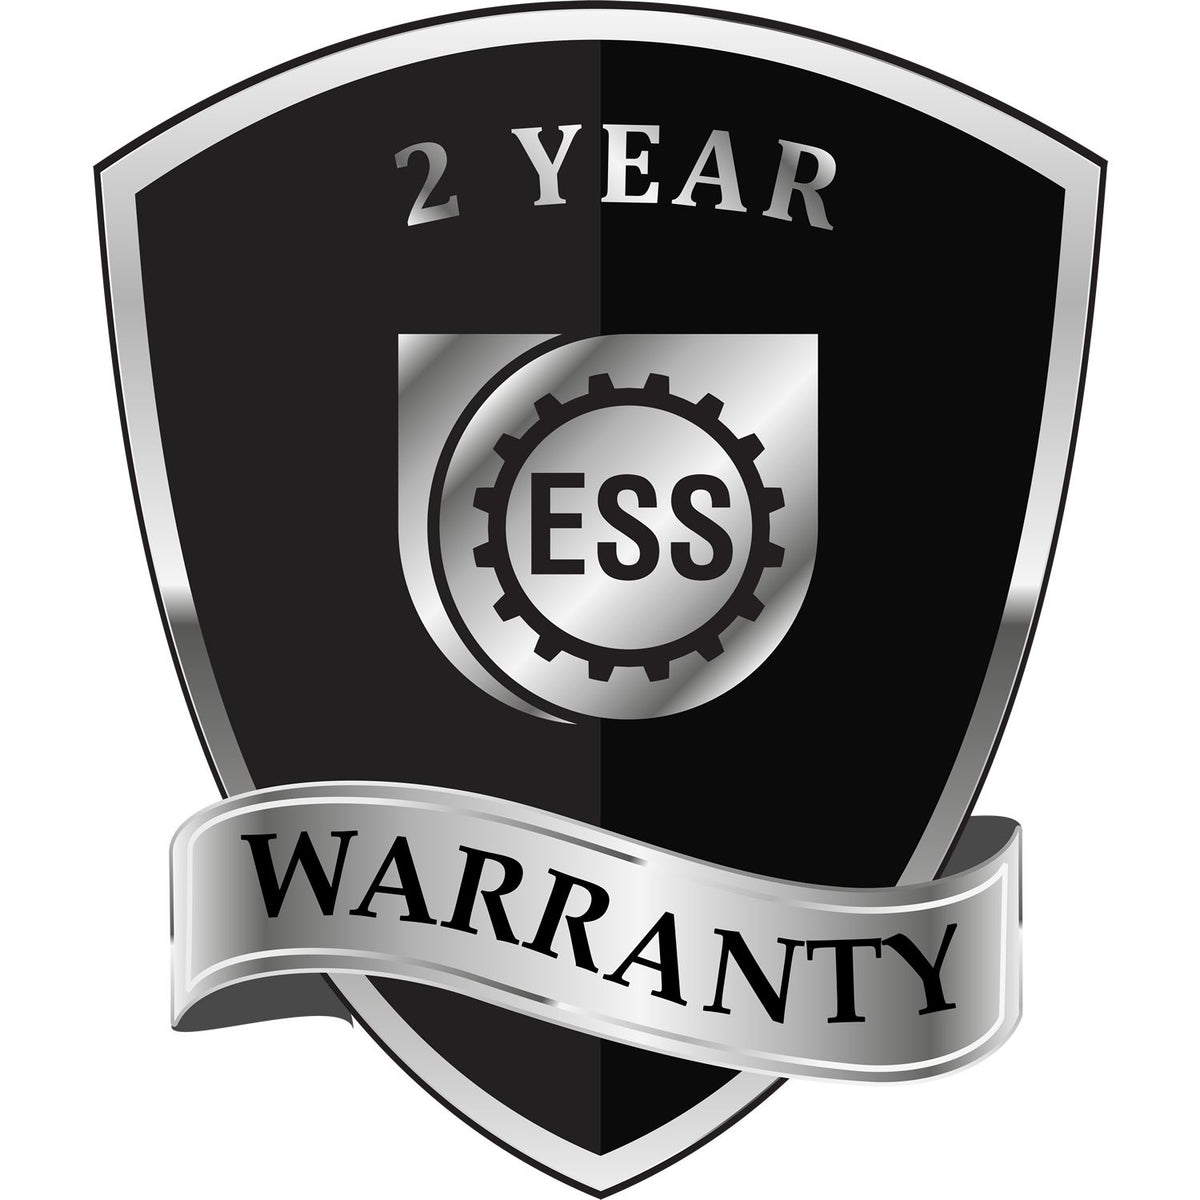 A black and silver badge or emblem showing warranty information for the Heavy Duty Cast Iron Arkansas Geologist Seal Embosser